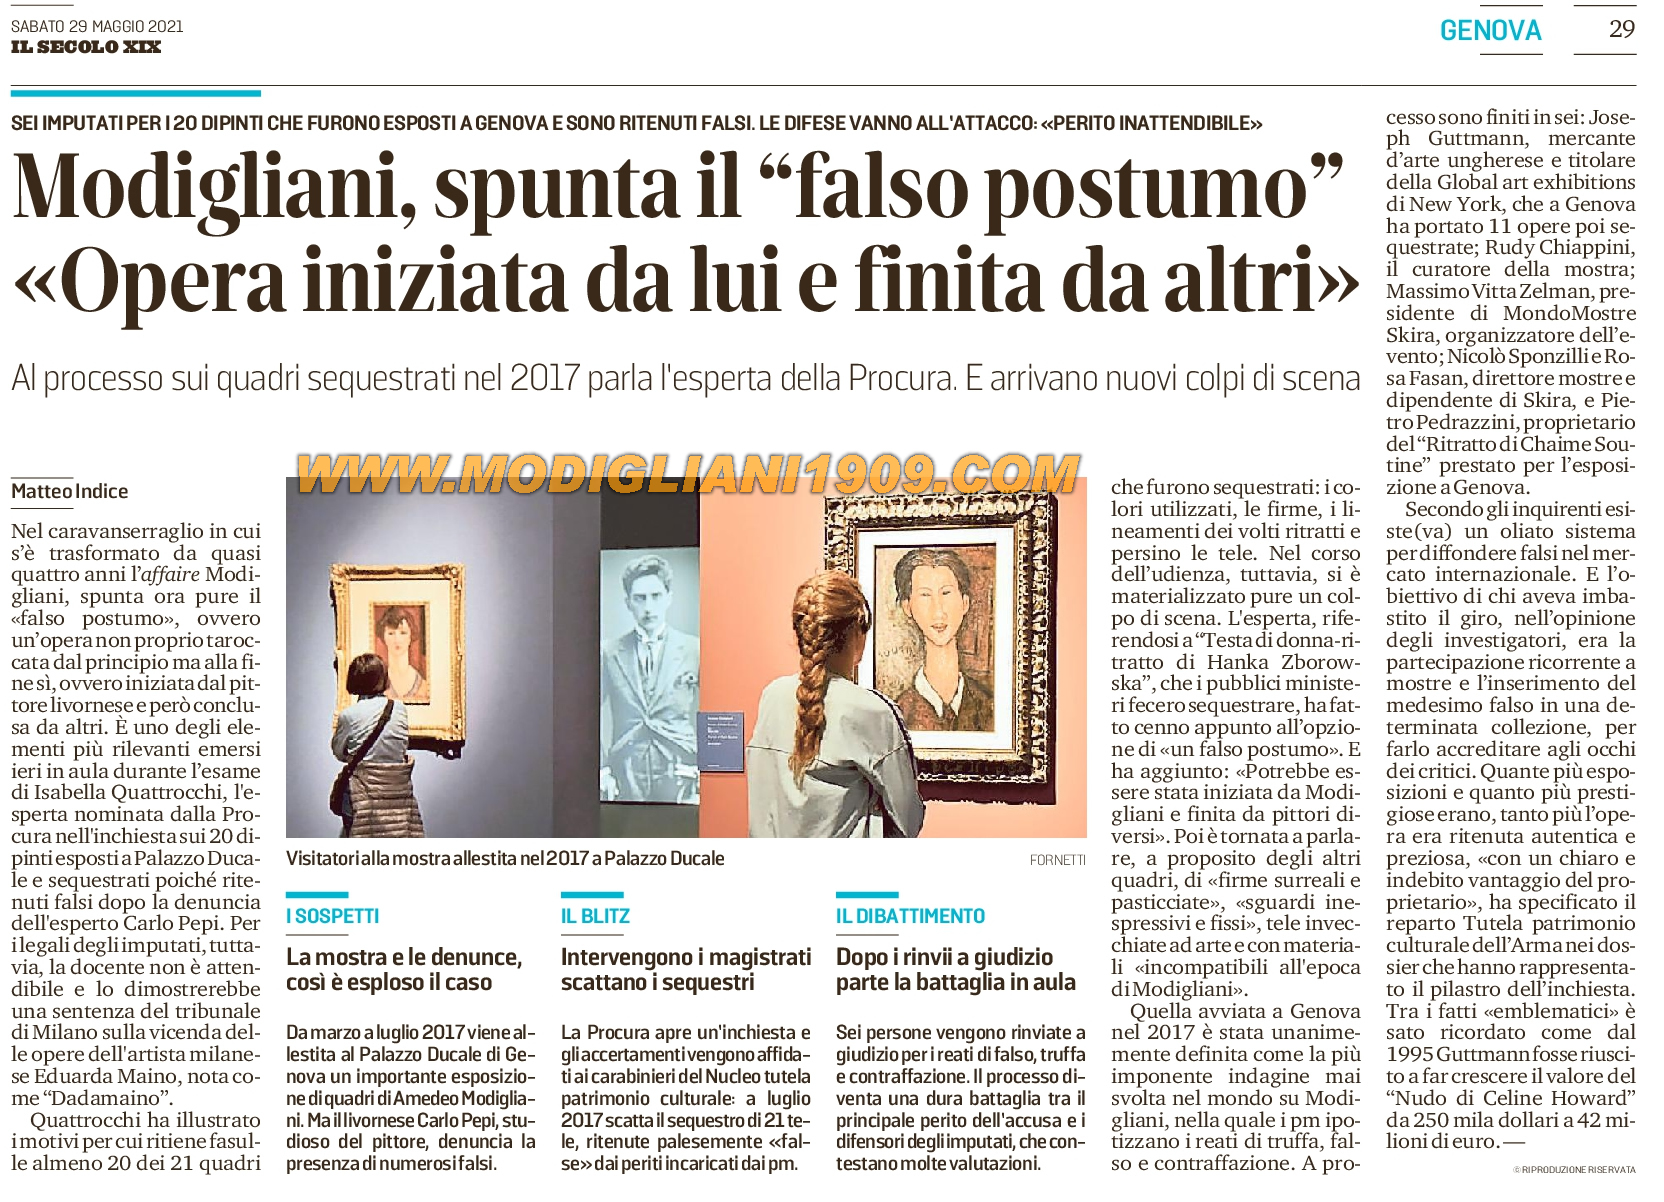 Modigliani and the 'fake posthumous': «work begun by him and finished by others»